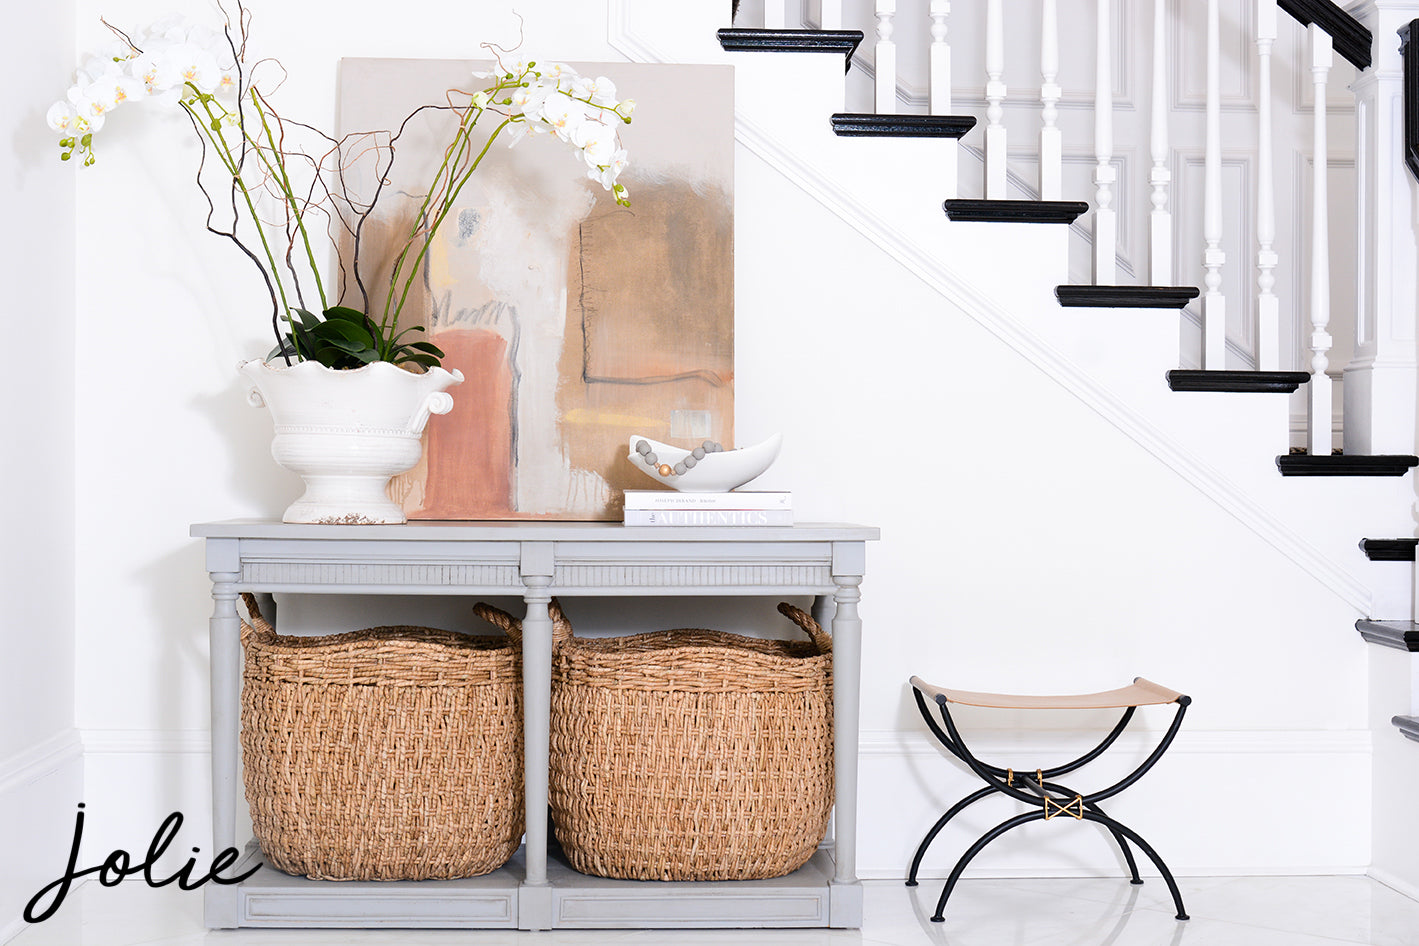 Jolie Paint – Southern Chic Home